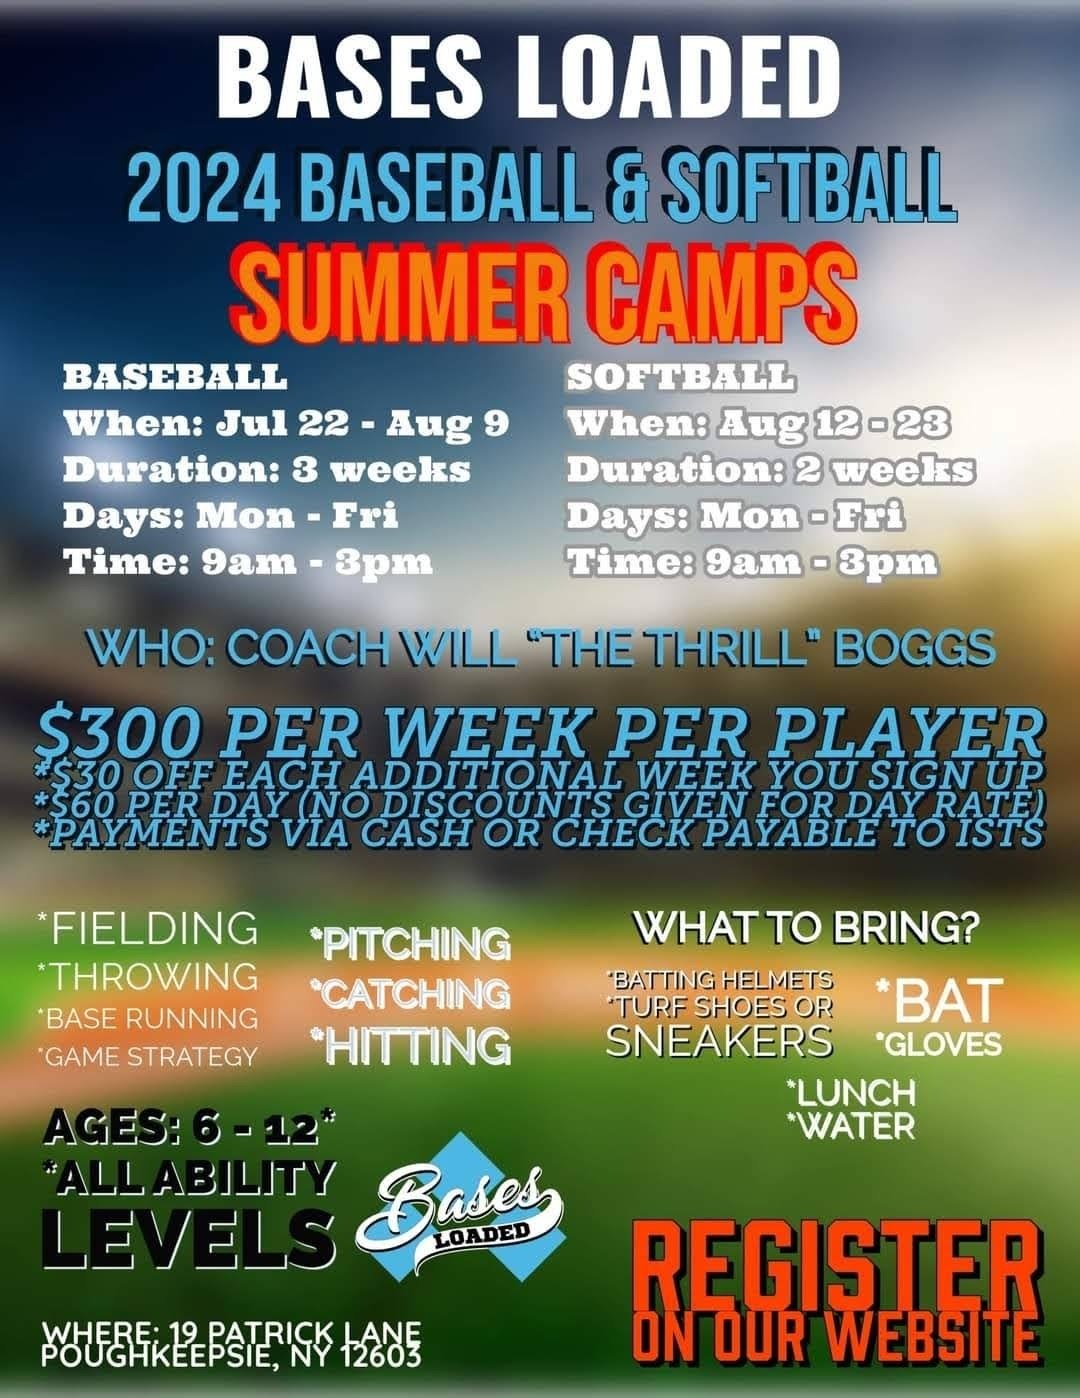 Step up to the plate this summer! ⚾🥎 Join our Baseball &amp; Softball Summer Camps to boost your skills from fielding to hitting! 🌟 Coach Will 'The Thrill' Boggs is ready to knock your potential out of the park! 🏟️ 

Got what it takes? Reserve you